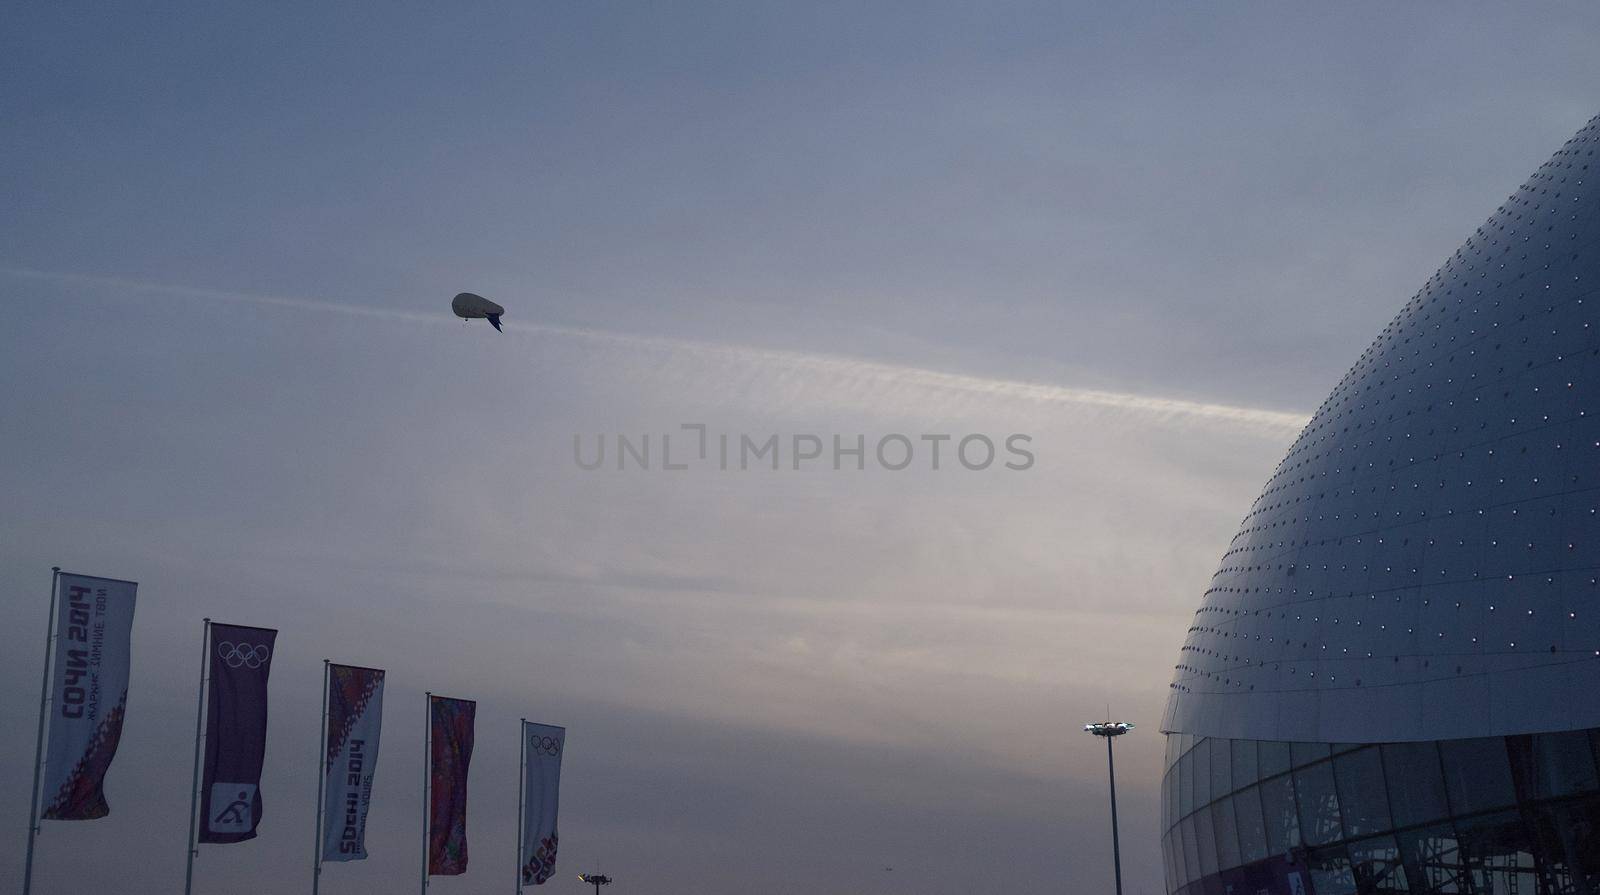 February 20, 2014.Sochi, Russia. An airship in the sky over the Bolshoi Ice Palace in Sochi.